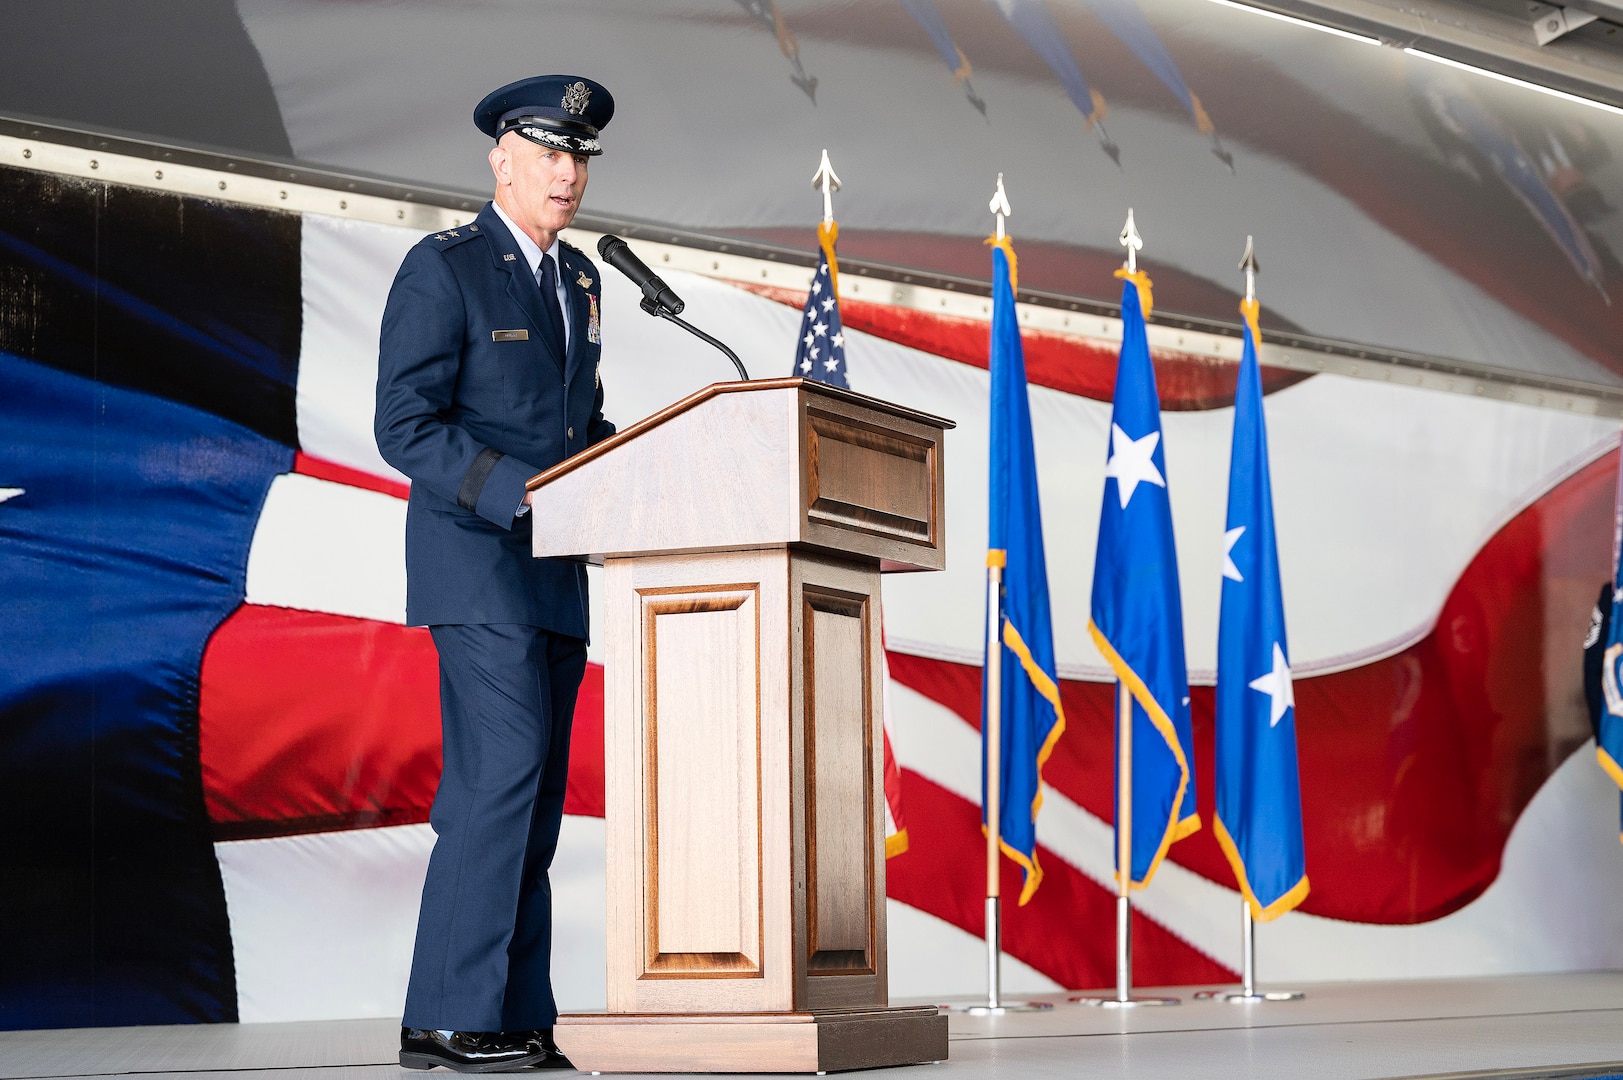 U.S. Air Force Maj. Gen. Clark Quinn, 19th Air Force commander, speaks to his command after receiving the unit guidon during the 19th AF assumption of command ceremony